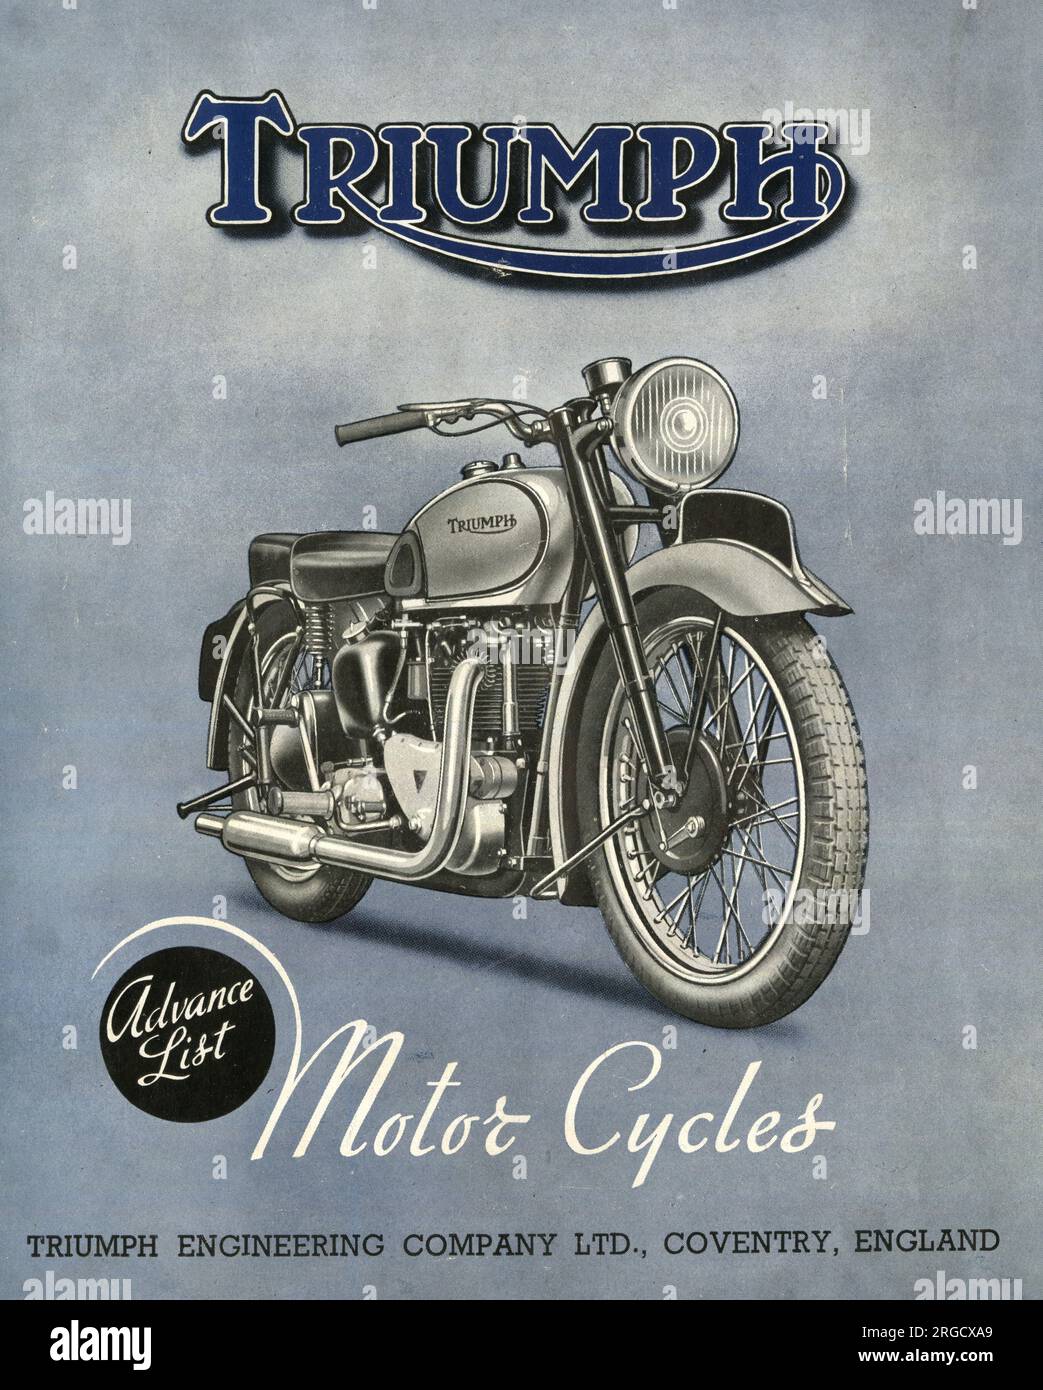 Triumph Motor Cycles, Advance List, cover design of sales brochure, Triumph Engineering Company, Coventry Stock Photo